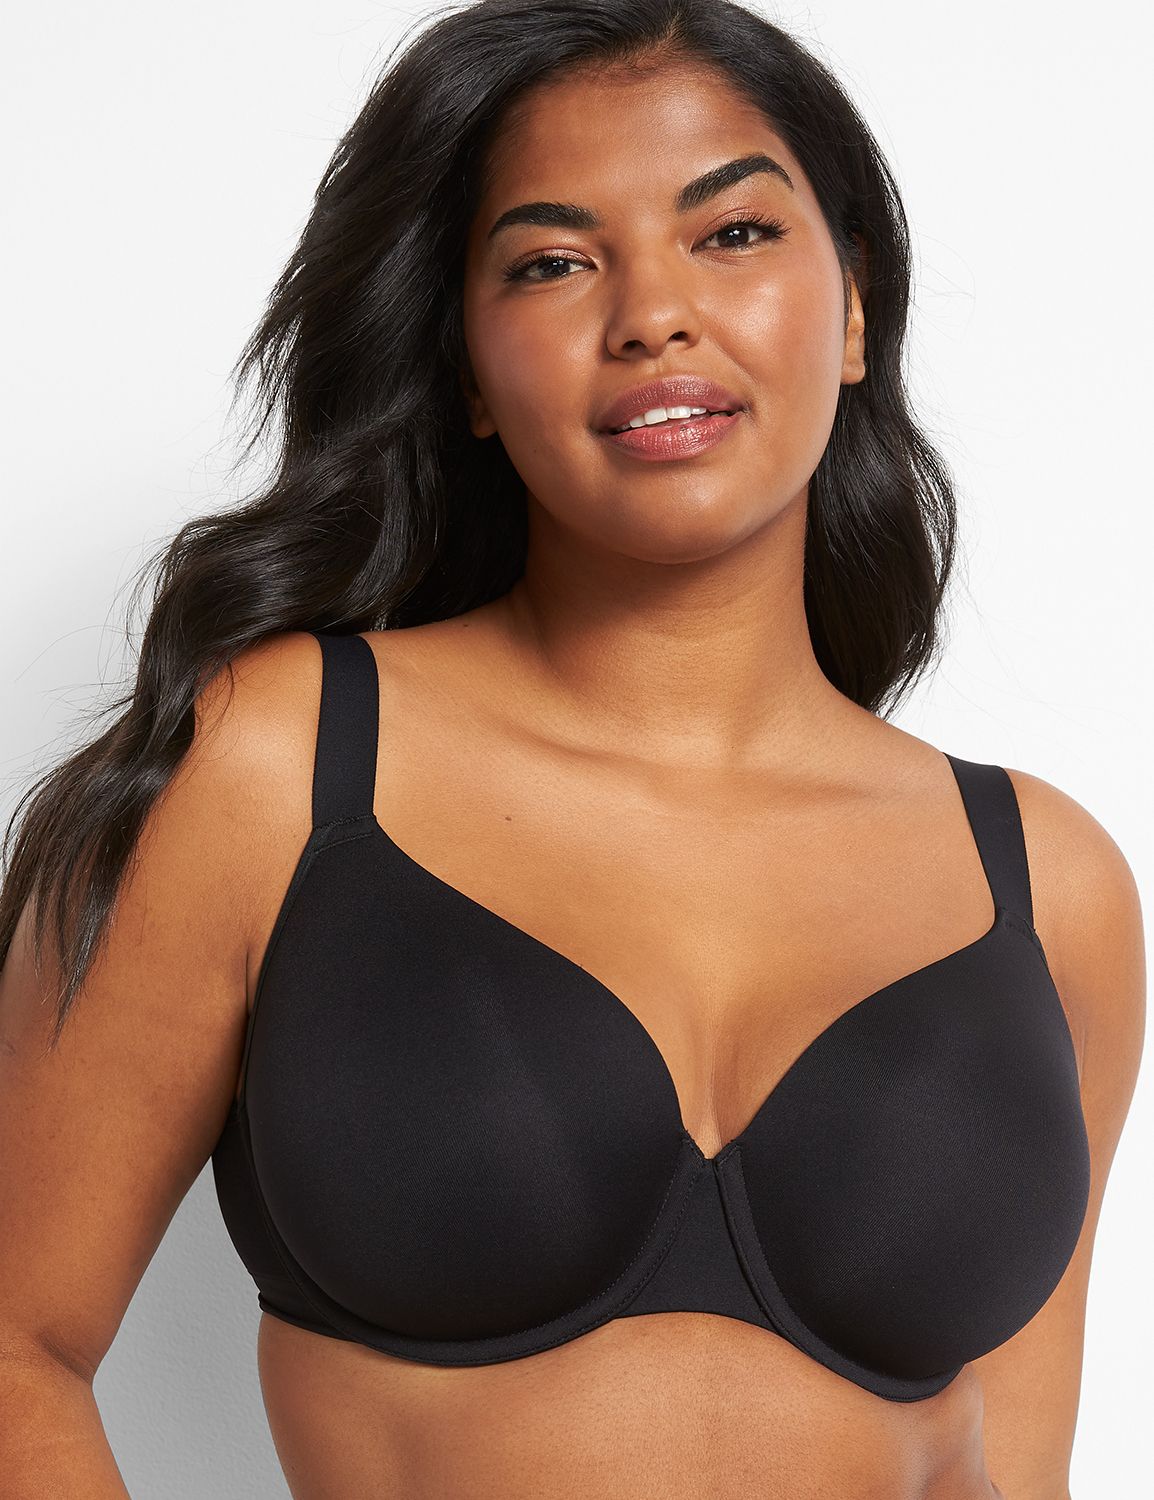 Cacique 42D No Wire Lightly Lined T-Shirt Bra Black Wireless Size undefined  - $20 - From Stephanie